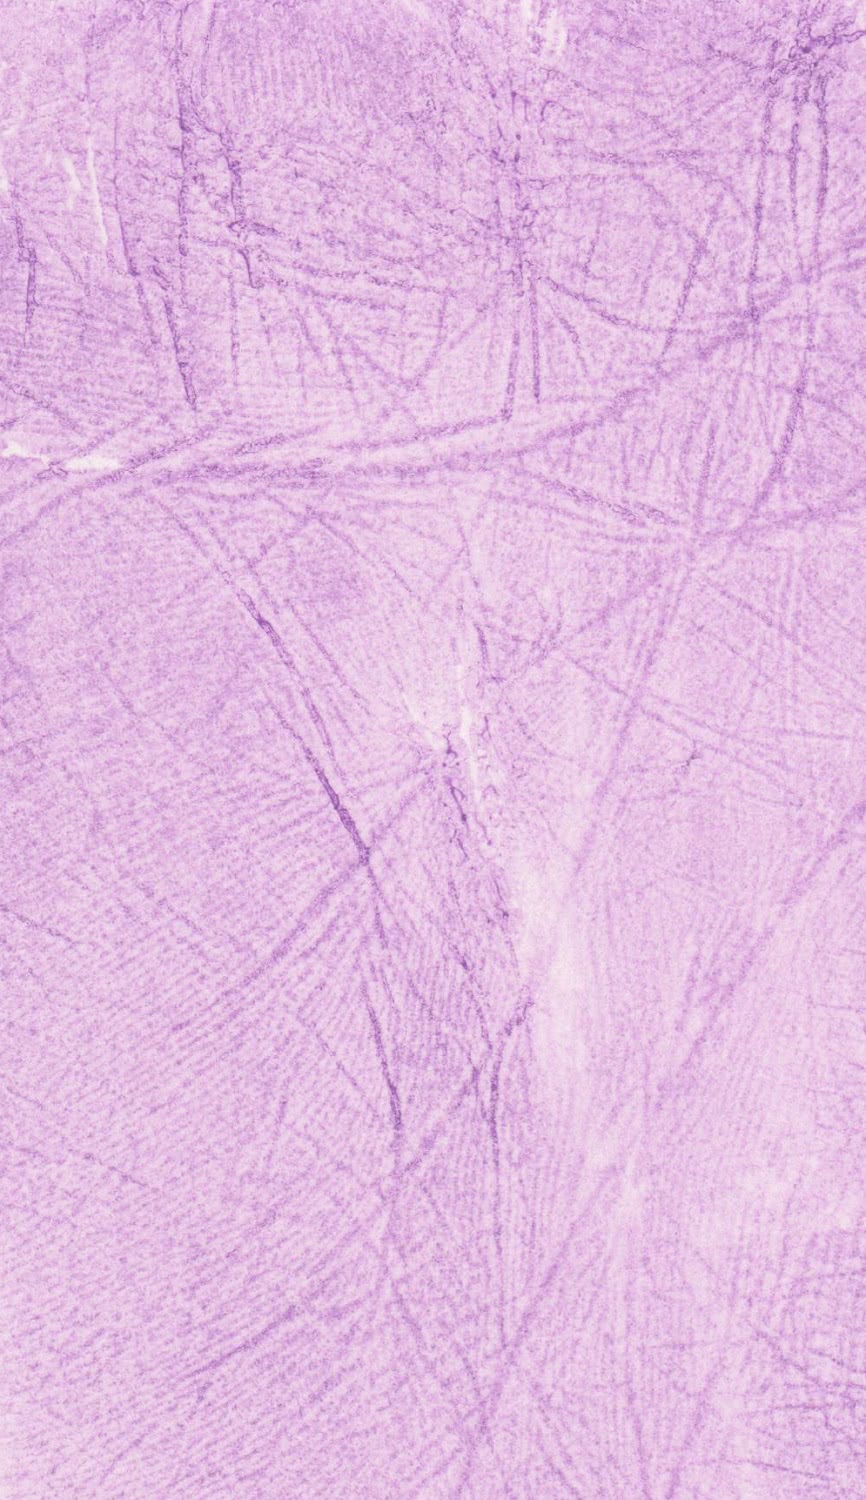 Part of a hand print close up, Purple